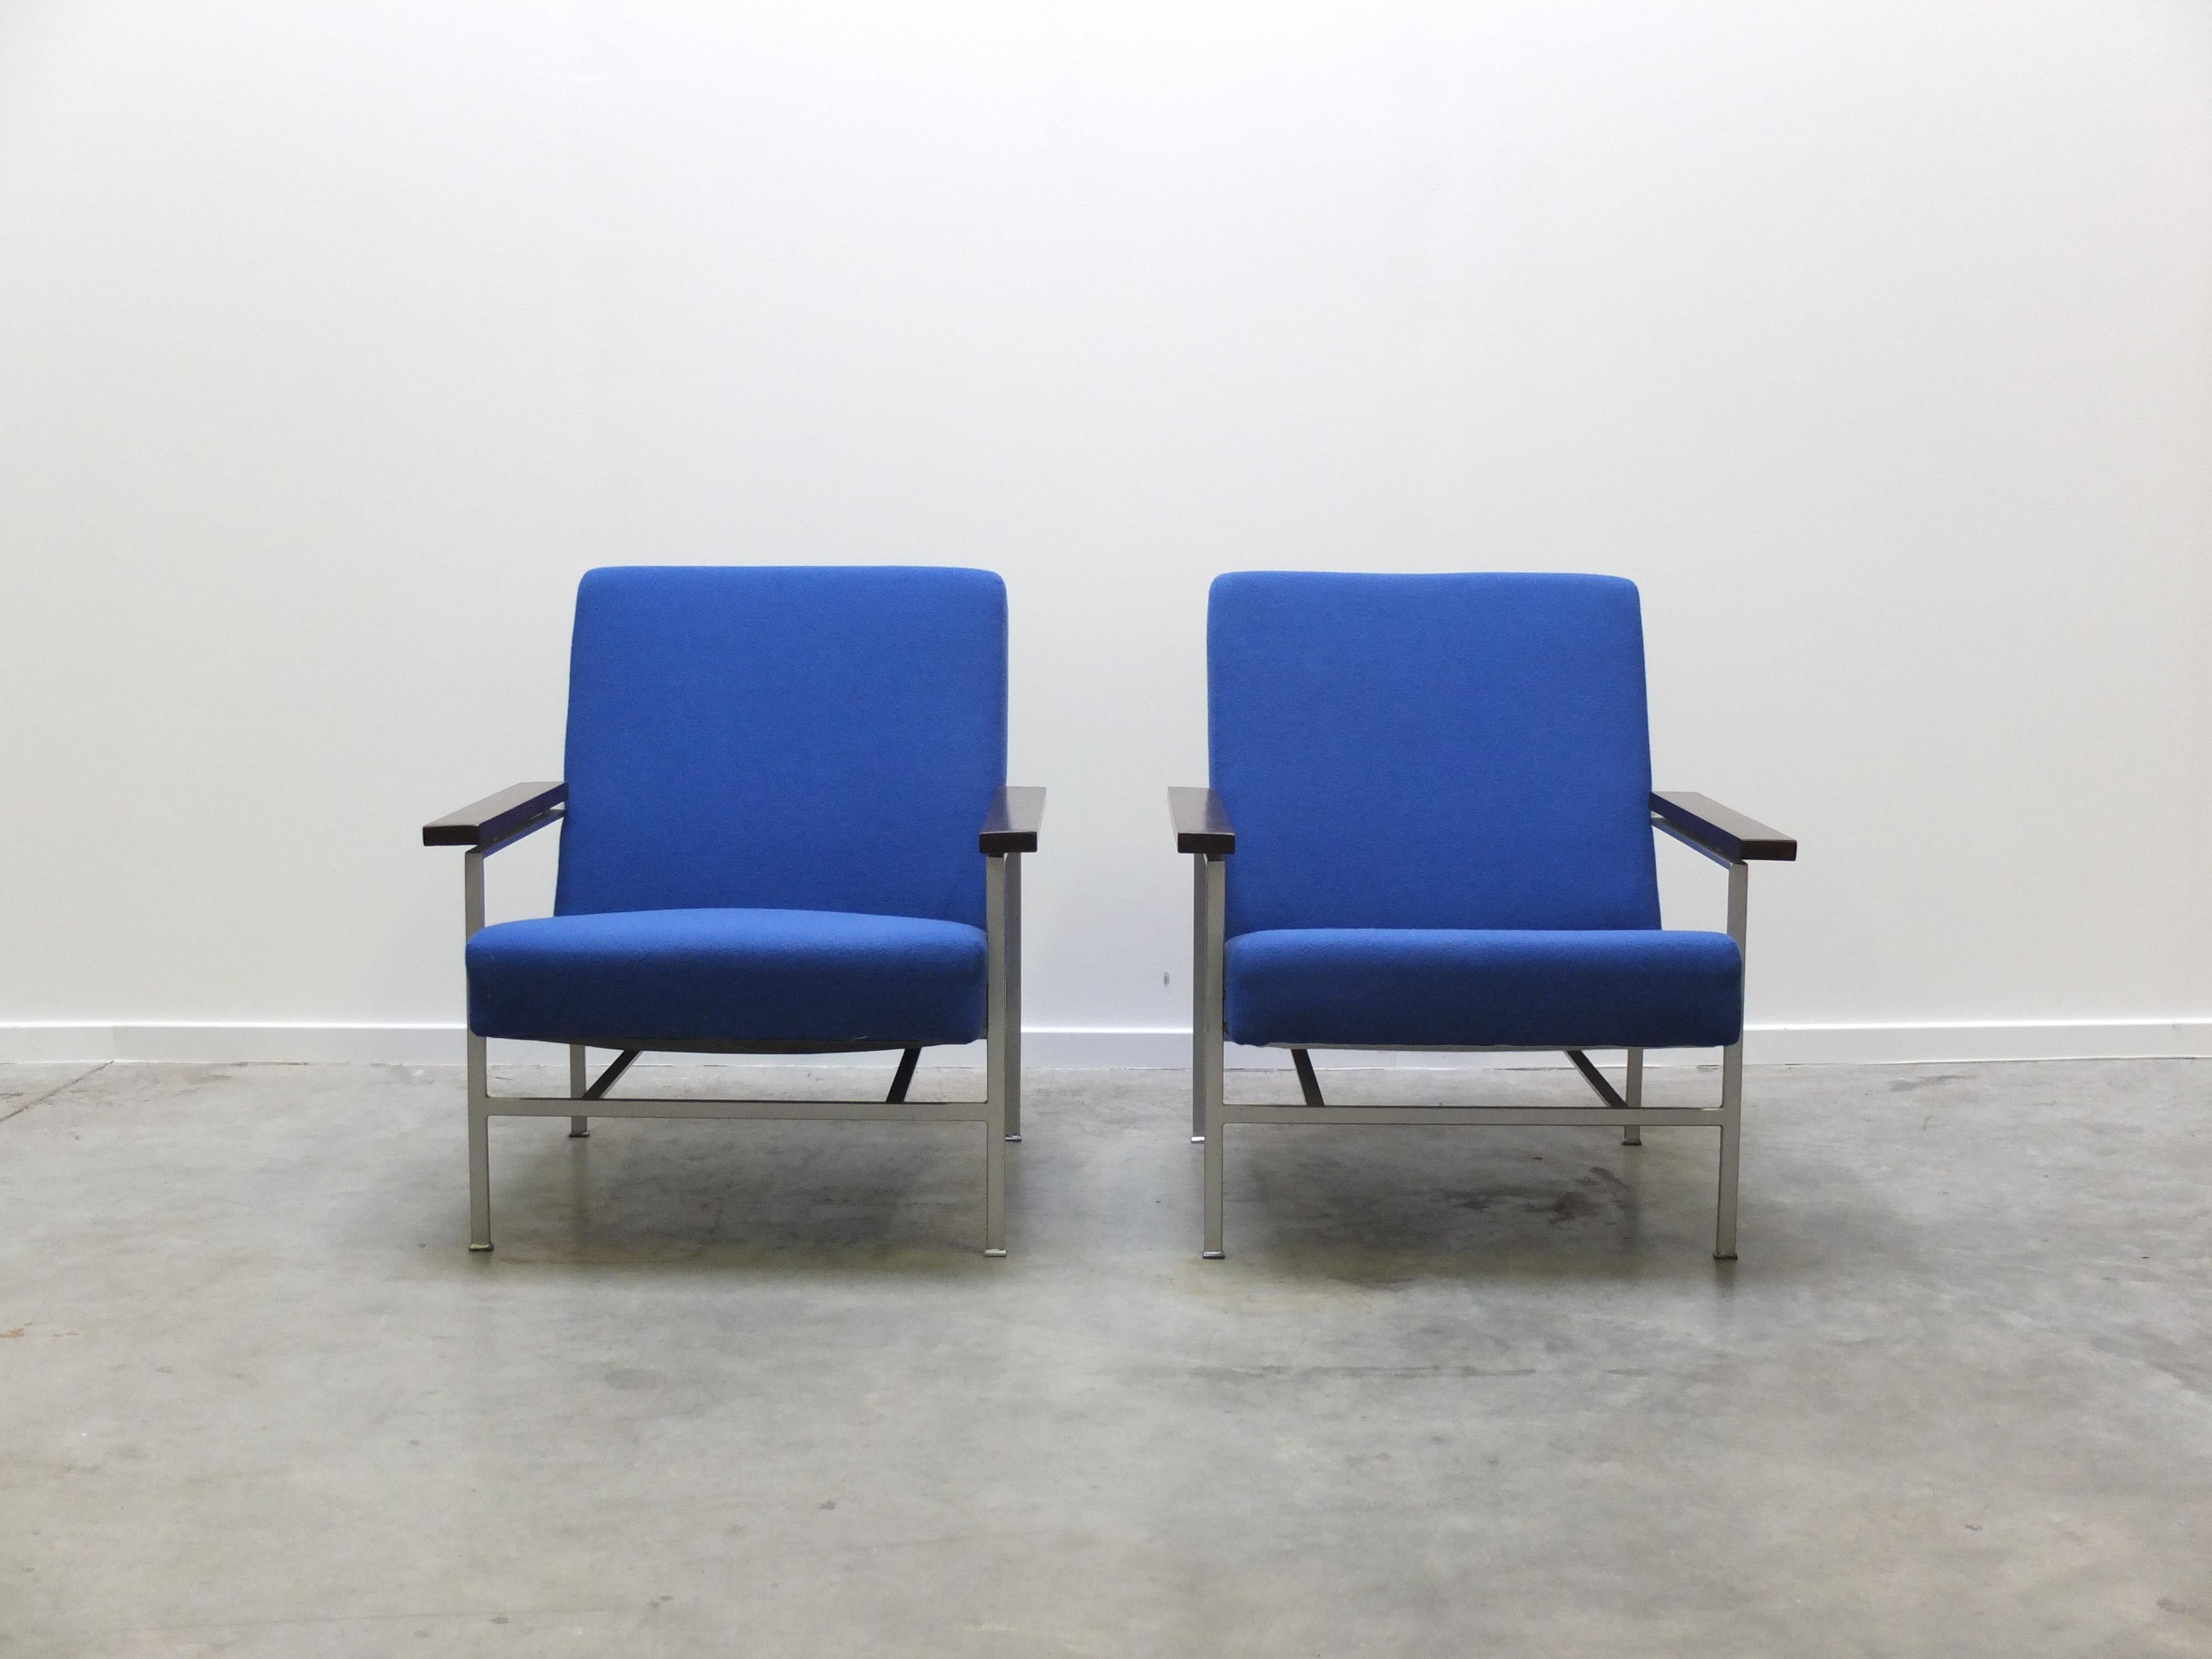 Stunning pair of easy chairs designed by Rob Parry for Gelderland during the 1950s. Modernist touch thanks to the rectangular metal frame combined with the signature floating wooden armrests. This pair has been professionally reupholstered with a